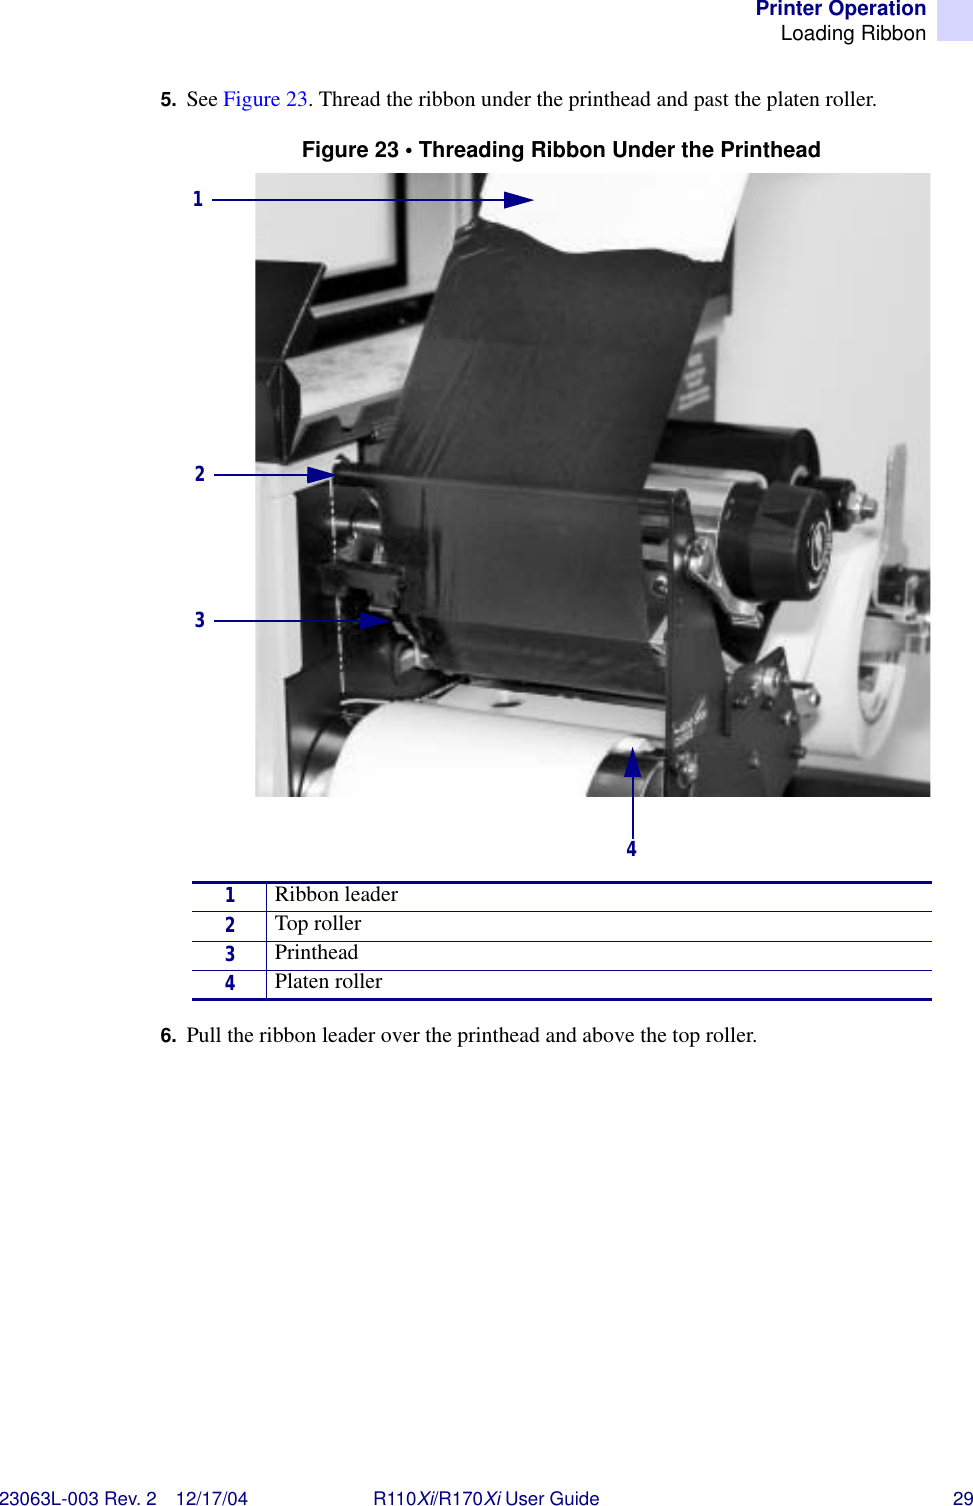 Printer OperationLoading Ribbon23063L-003 Rev. 2 12/17/04 R110Xi/R170Xi User Guide 295. See Figure 23. Thread the ribbon under the printhead and past the platen roller. Figure 23 • Threading Ribbon Under the Printhead6. Pull the ribbon leader over the printhead and above the top roller.1Ribbon leader2Top roller3Printhead4Platen roller2314